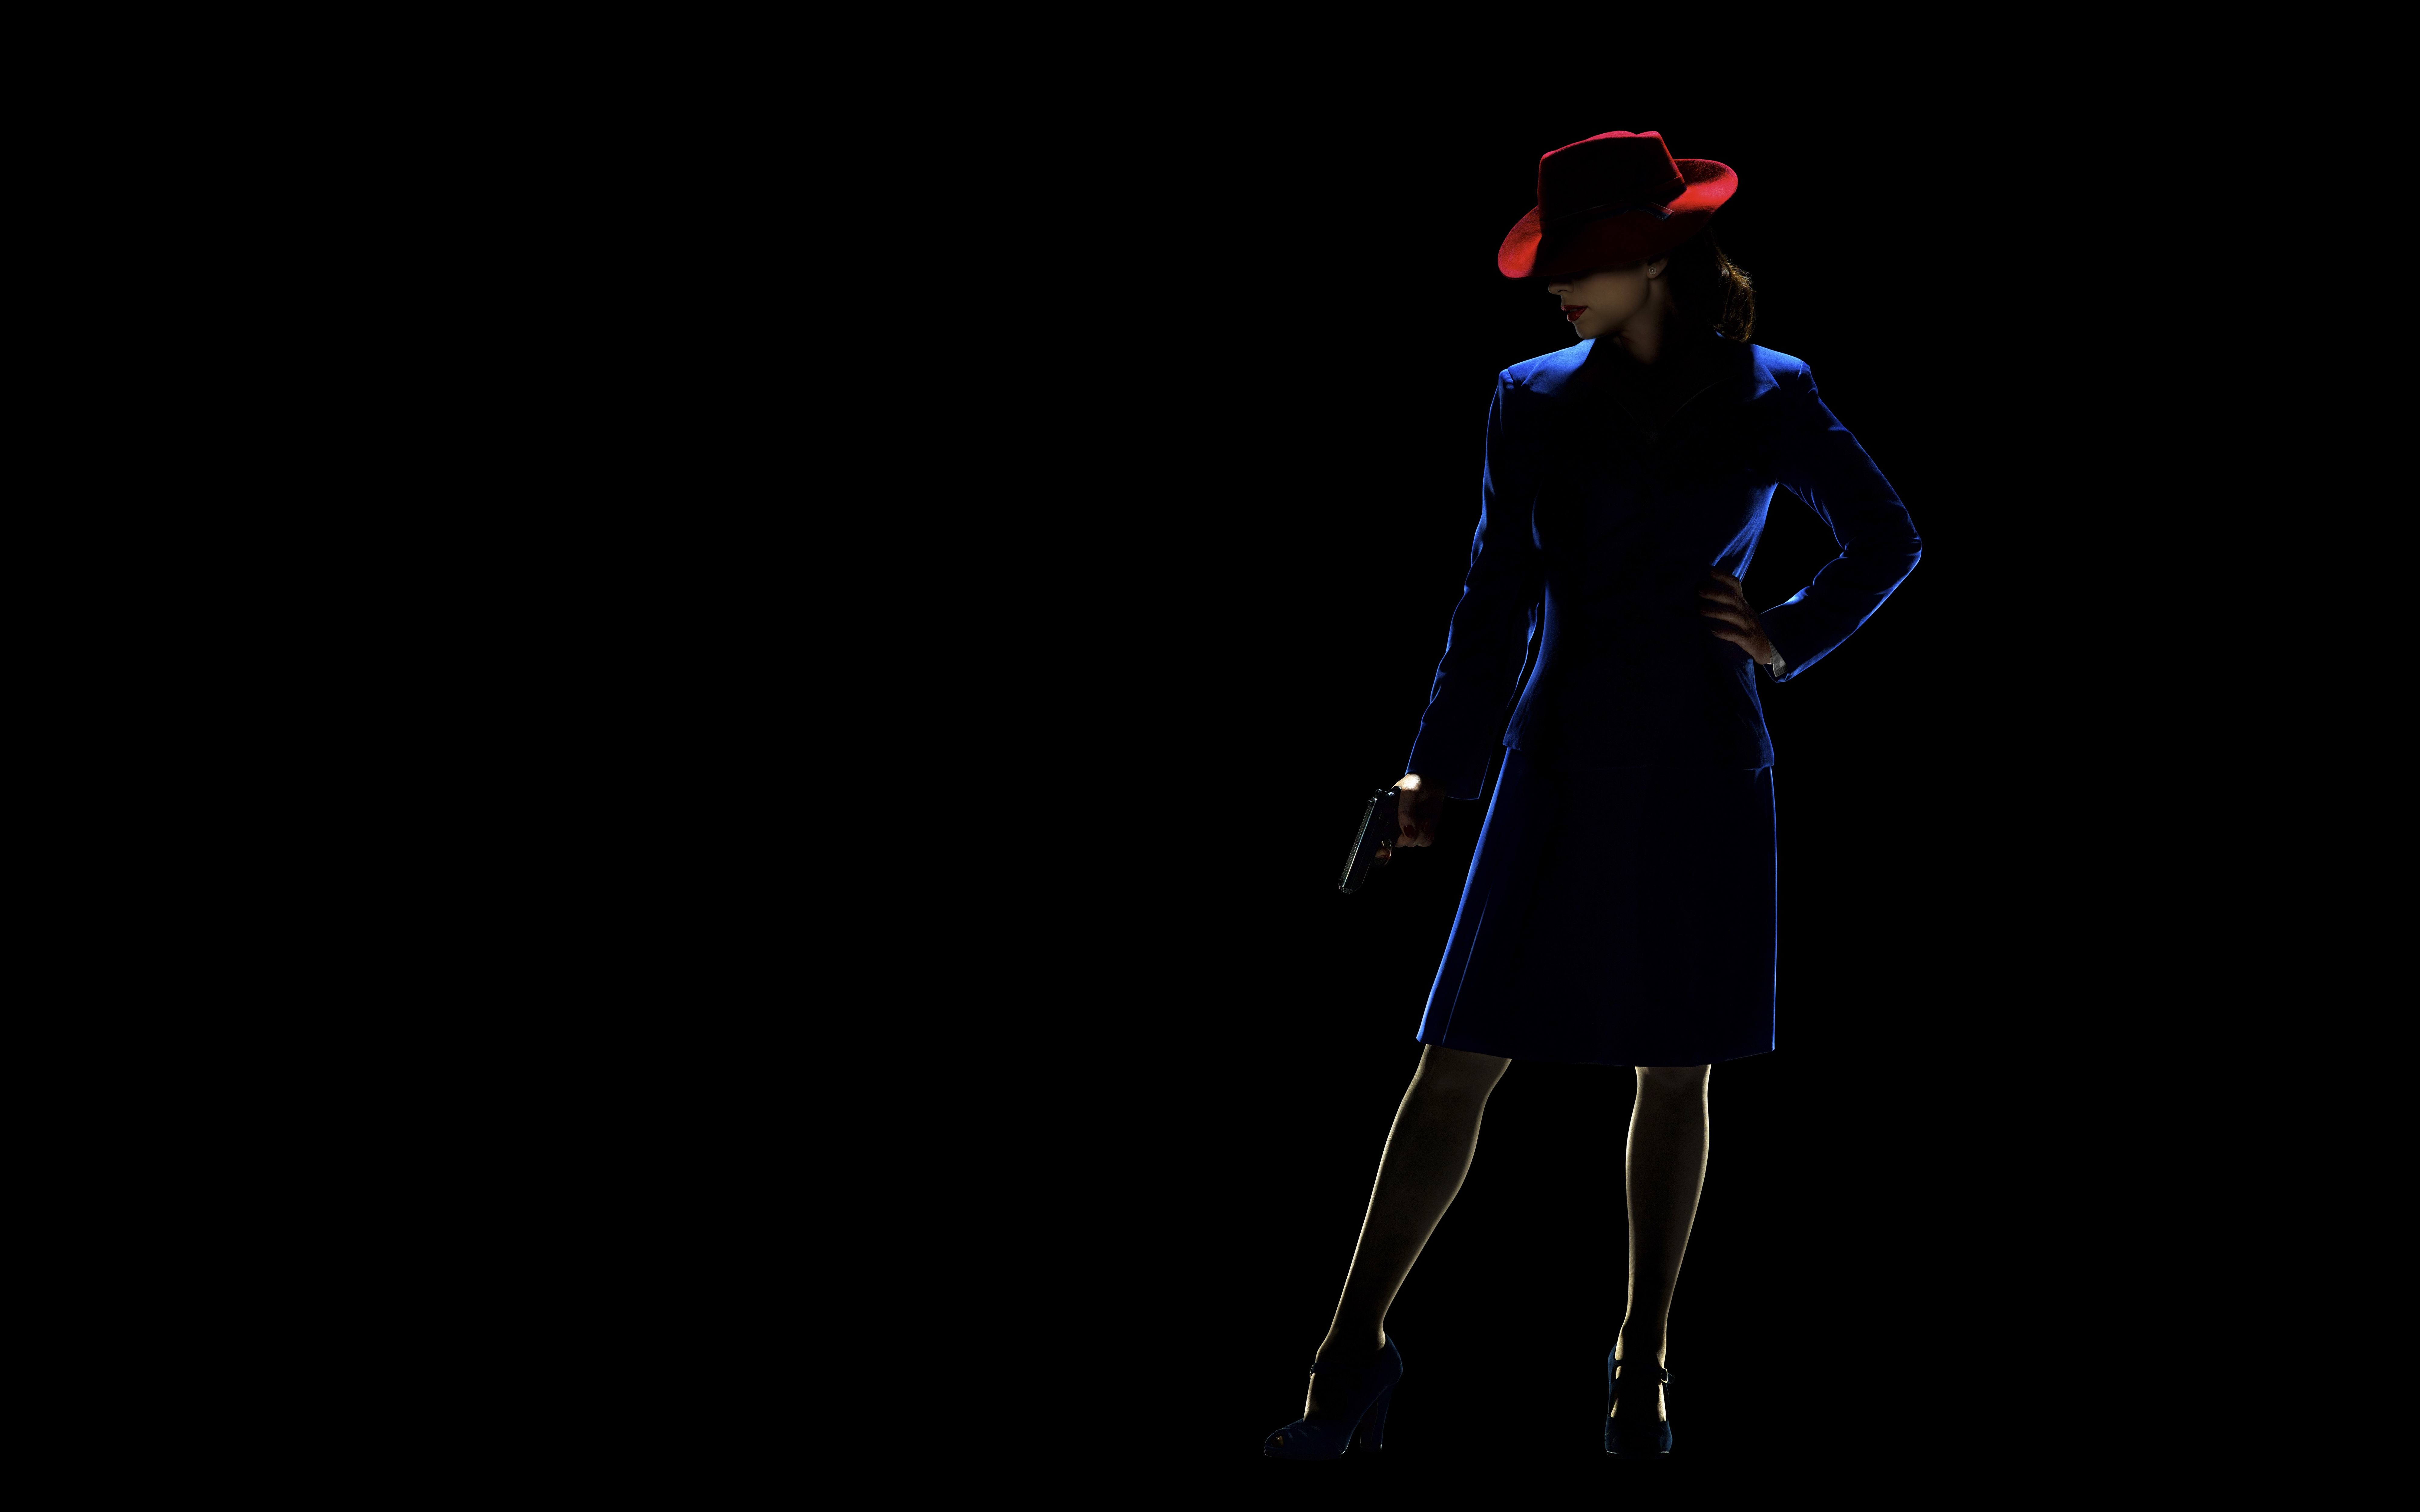 tv show, agent carter, hayley atwell, peggy carter